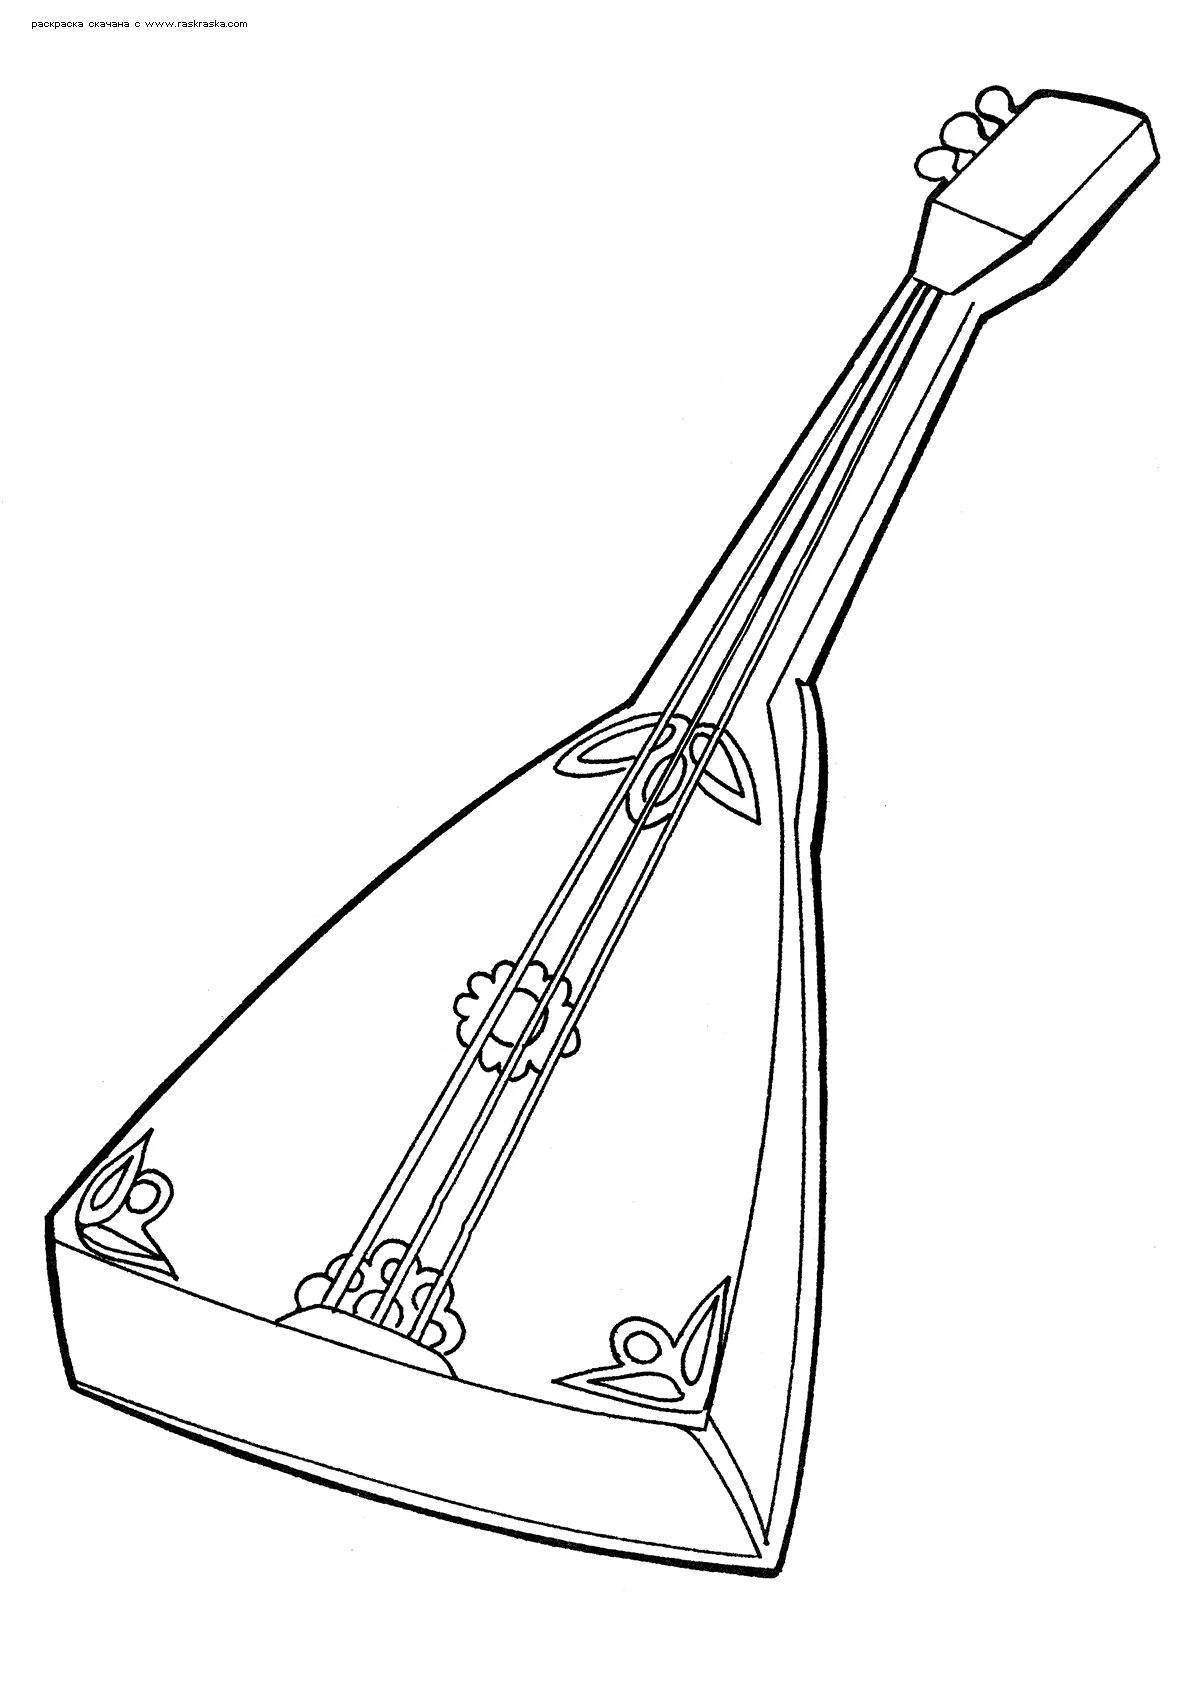 Coloring pages of Russian folk instruments for children